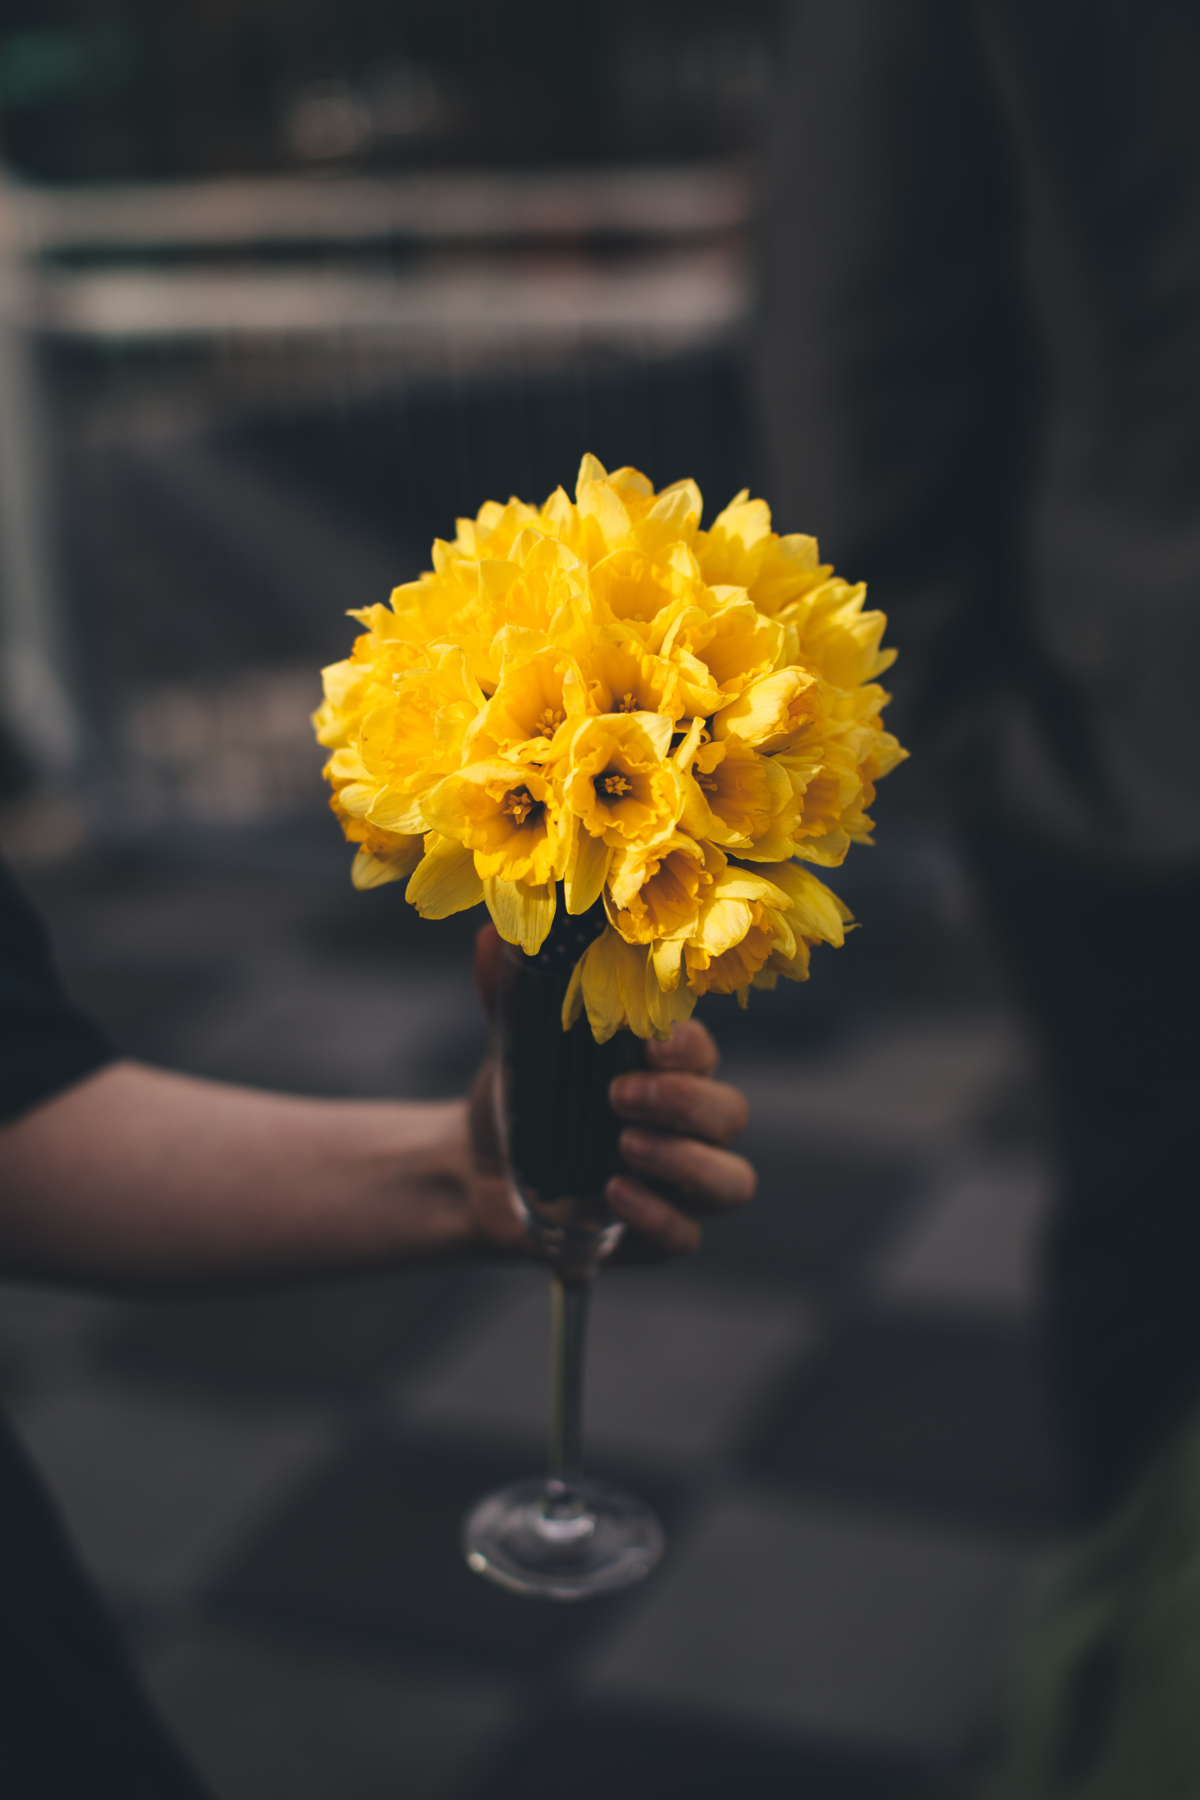 Person out of view holding a champagne glass with a bouquet of Daffodils in it